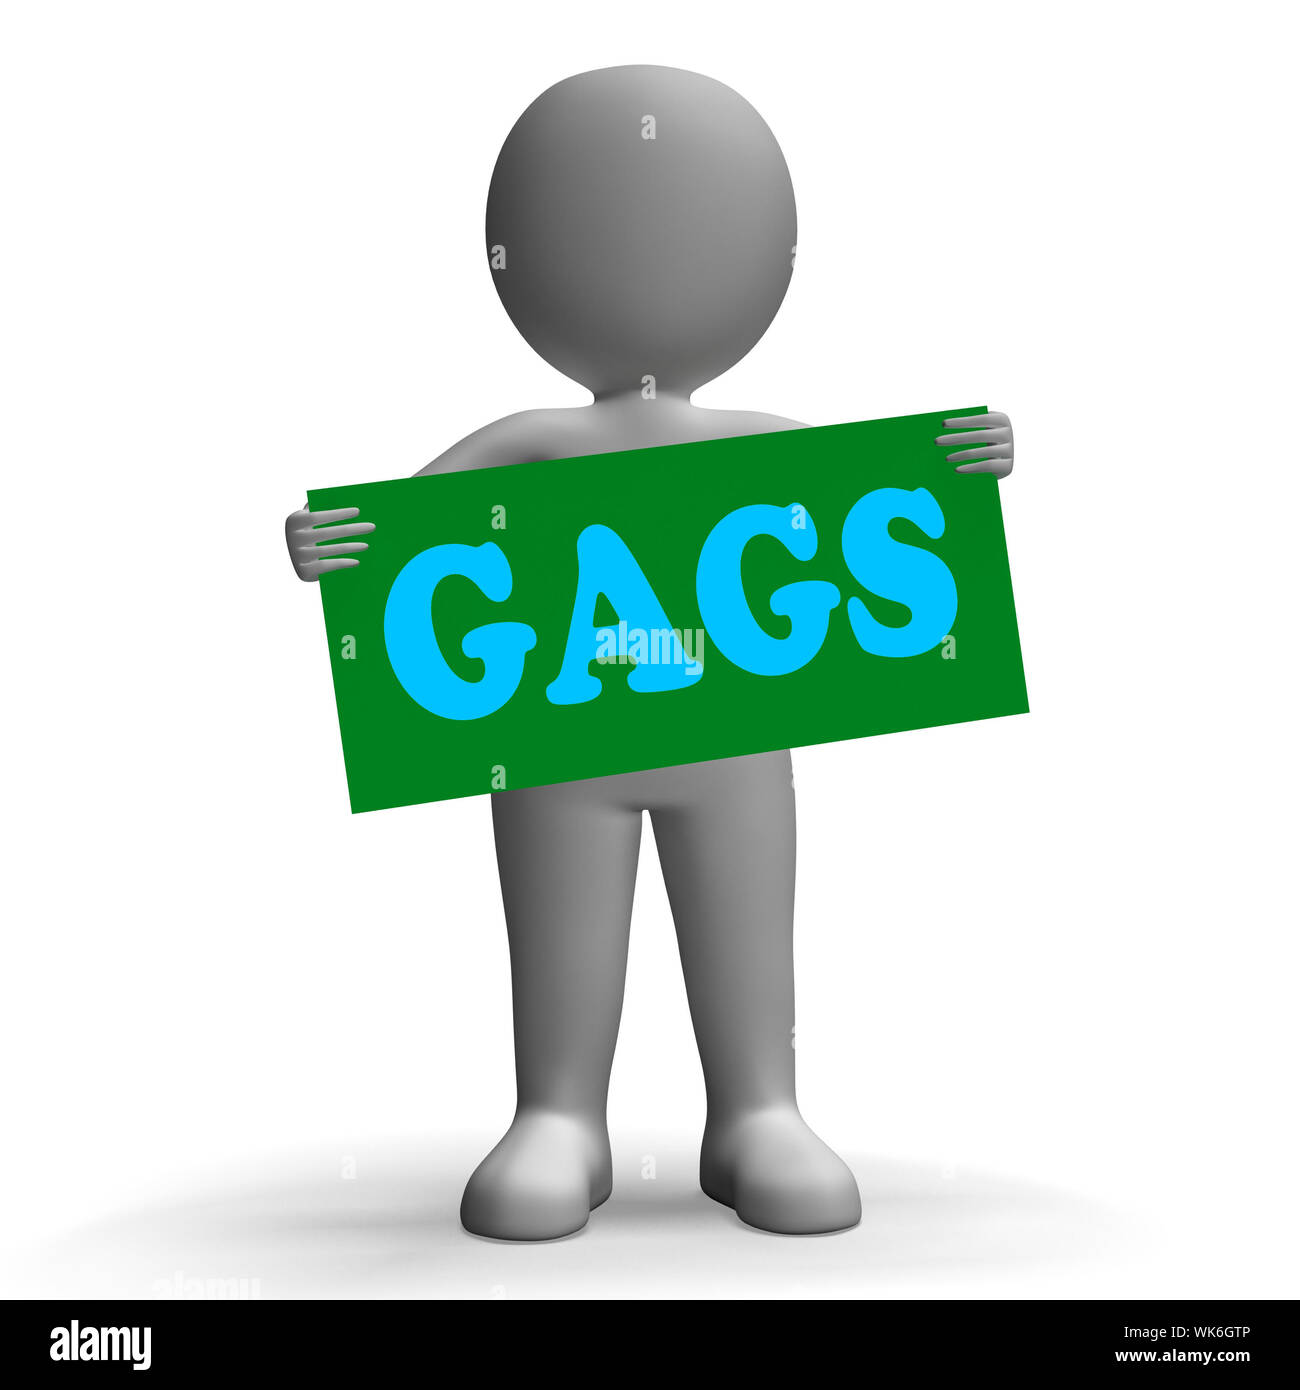 Gags Sign Character Meaning Comedy Humor And Jokes Stock Photo